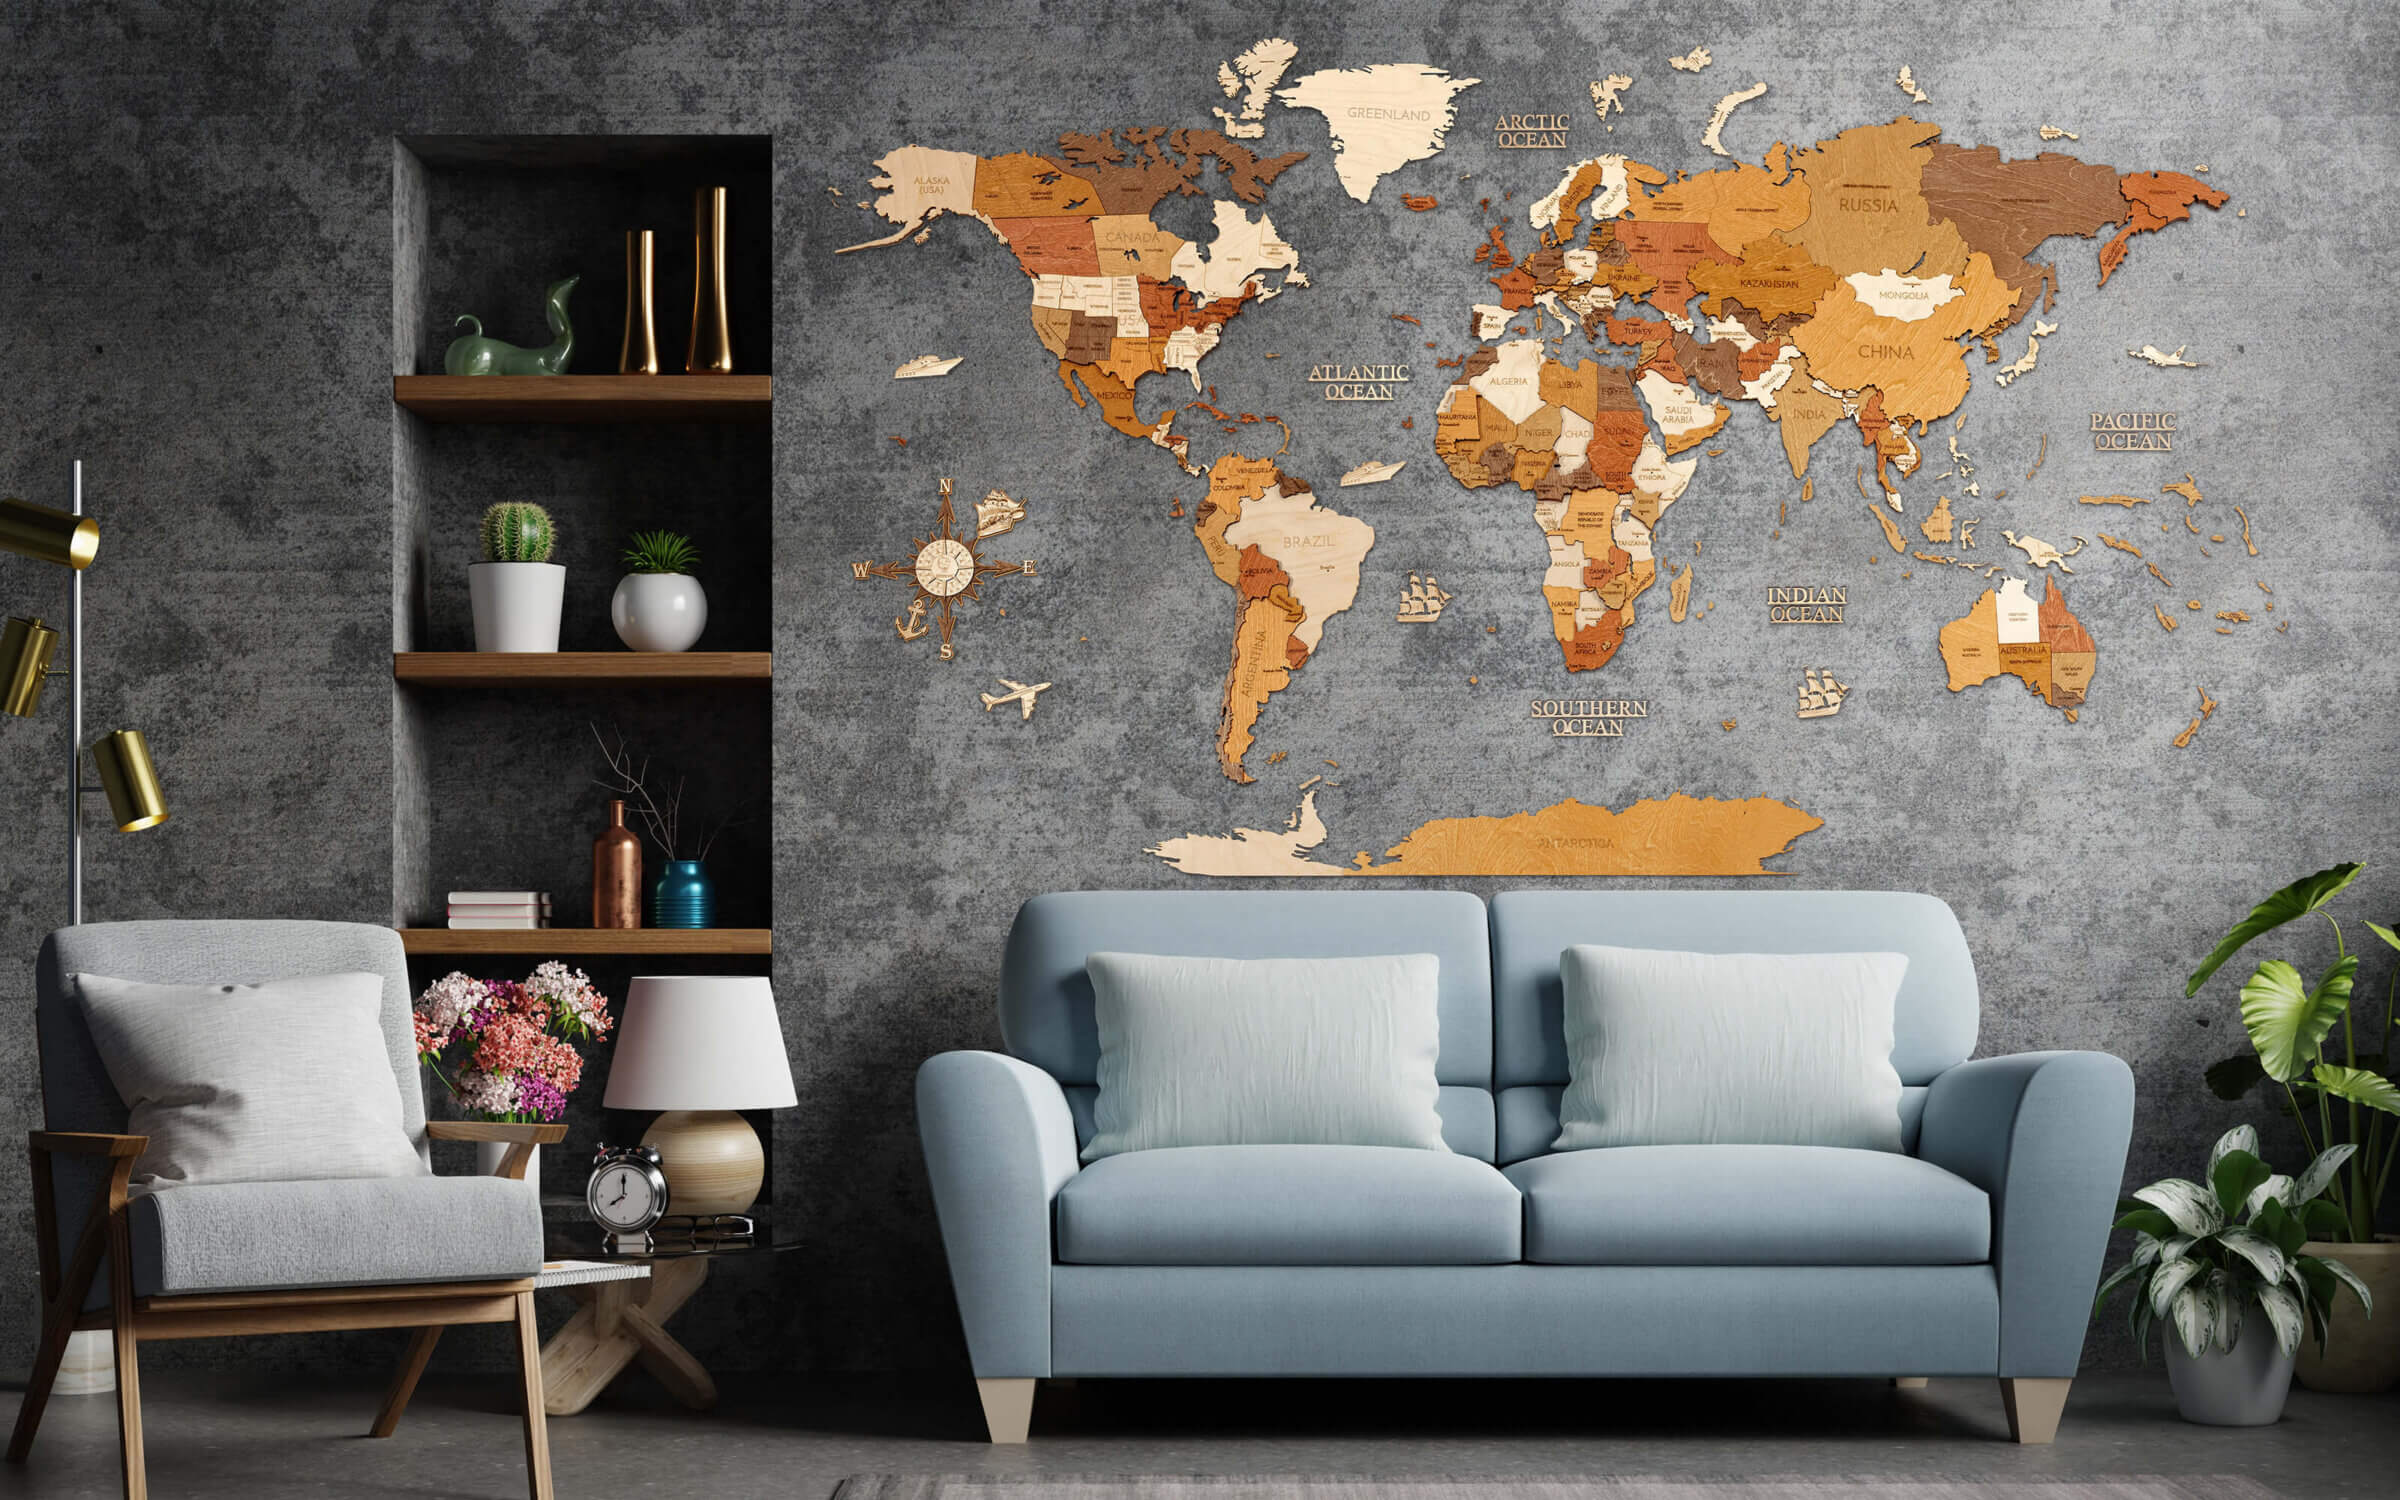 3D Colorful World Map Planes Wallpaper Full Wall Mural Photo Printed Home Decor